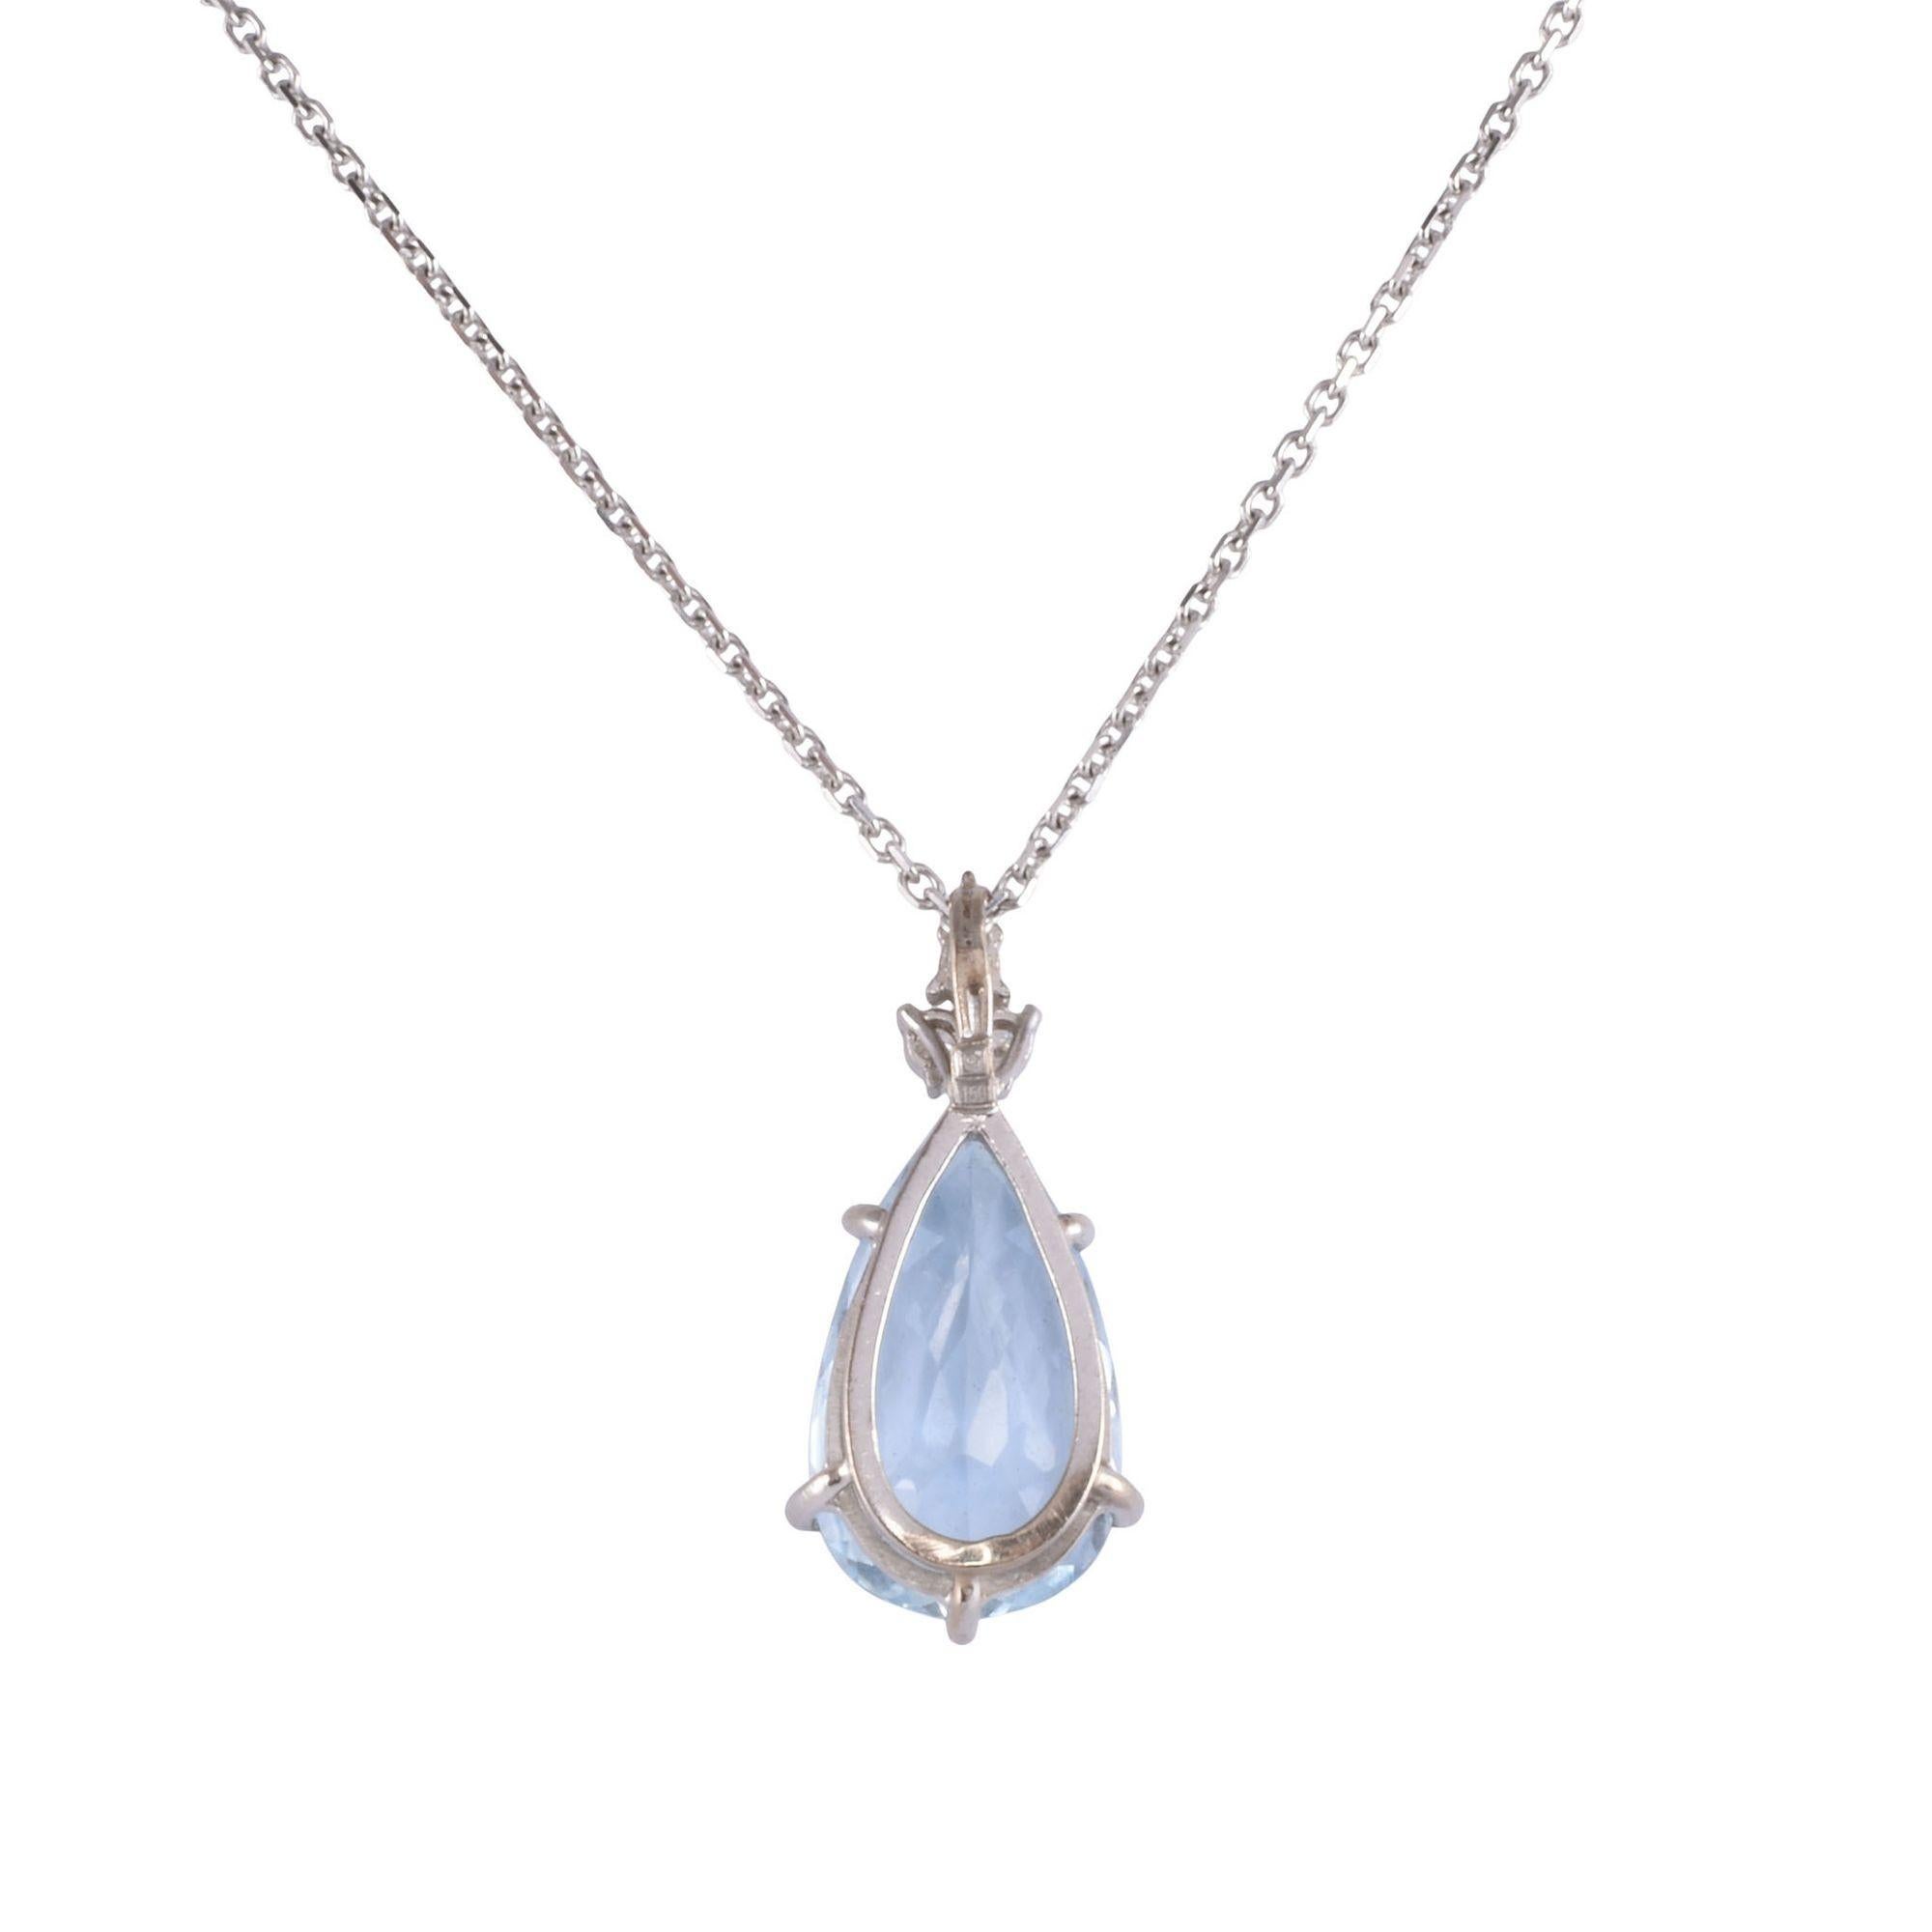 Estate pear aquamarine white gold pendant necklace. This 14 karat white gold pendant features a pear aquamarine at 7.75 carats. The aquamarine is clean and nicely cut. There are three accent diamonds at .11 carat total weight. The diamonds have VS